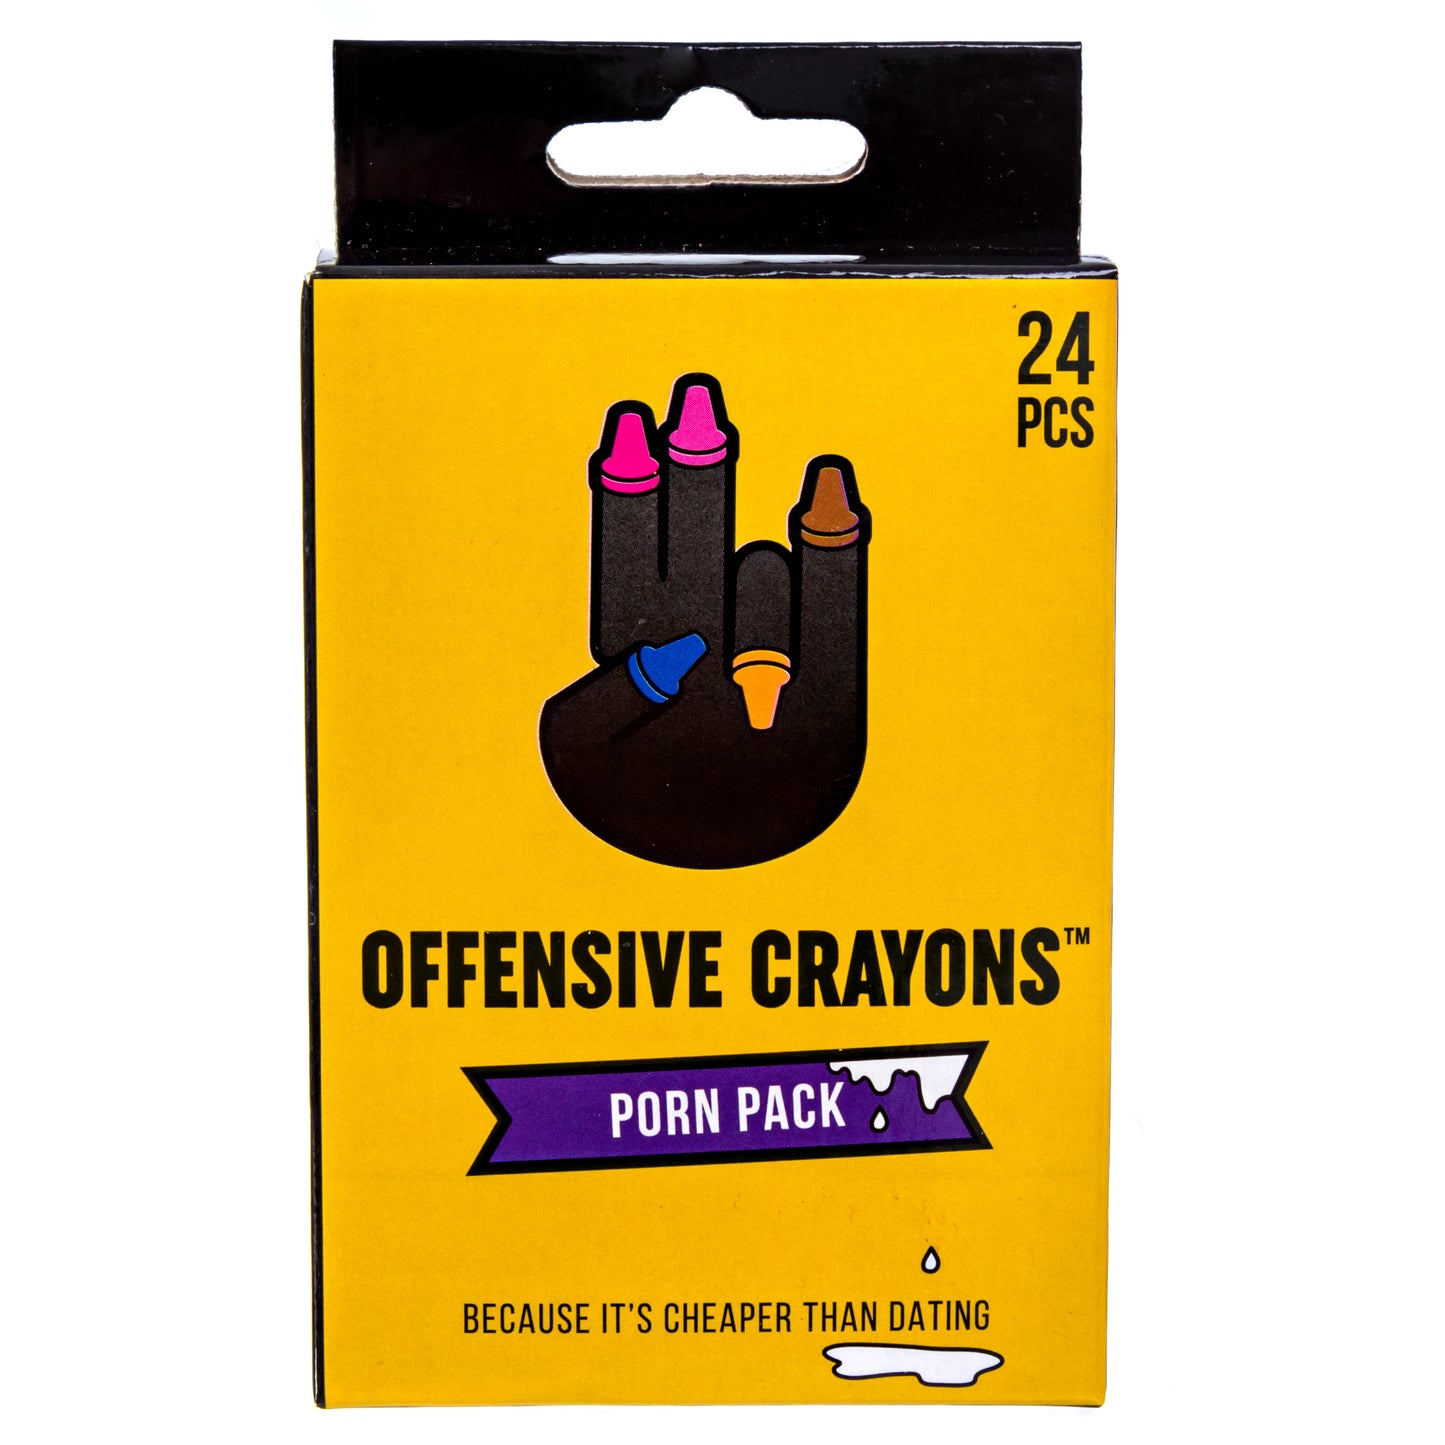 Offensive Crayons Porn Pack